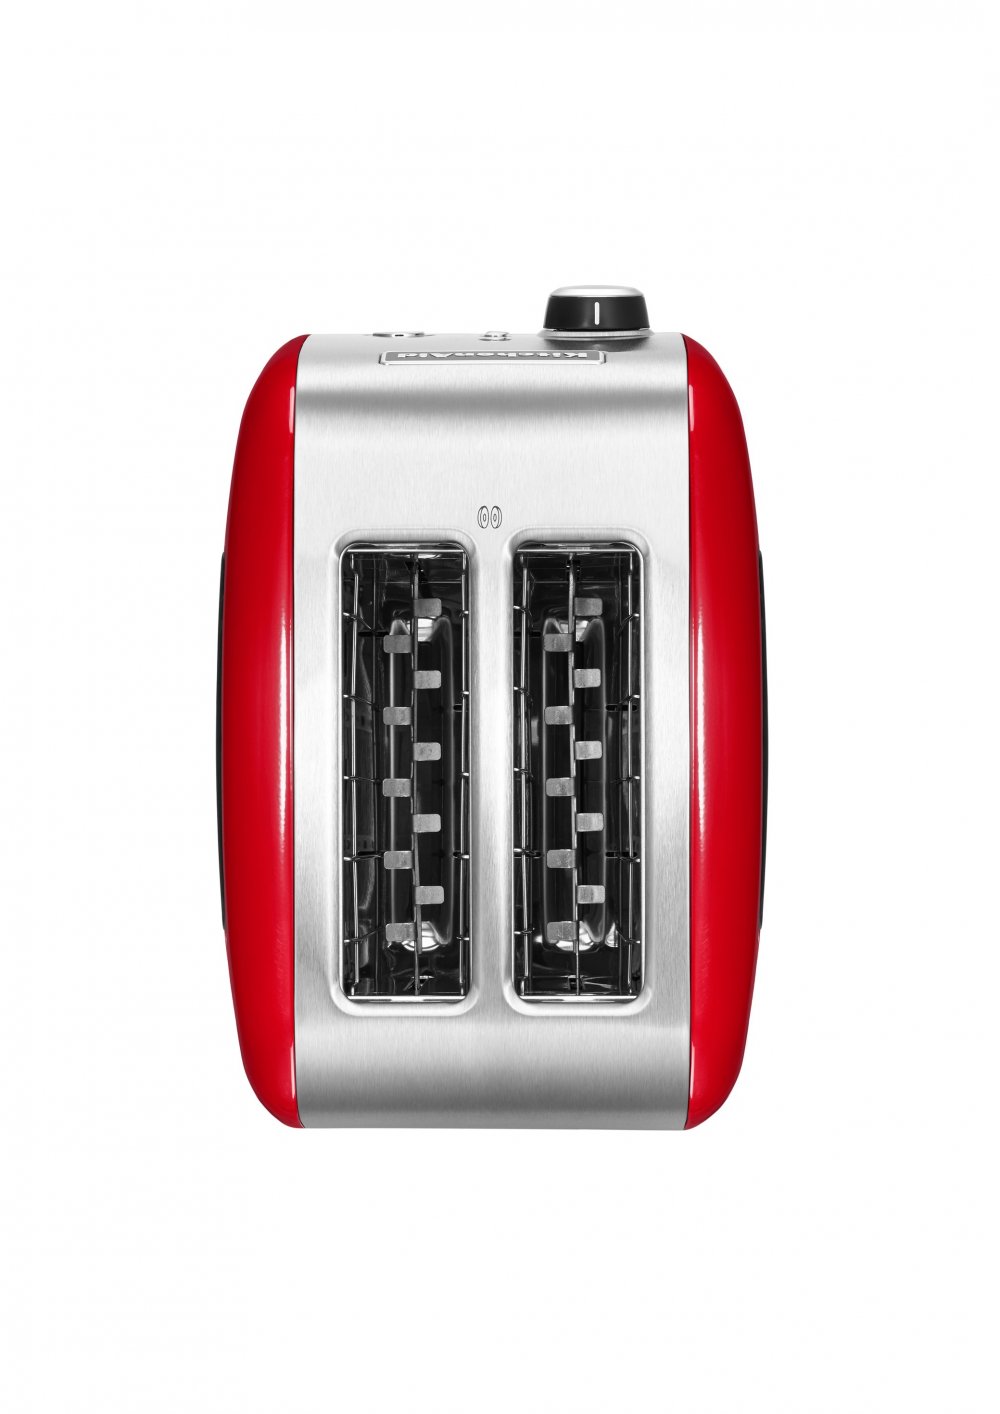 2-Slot Toaster - Red